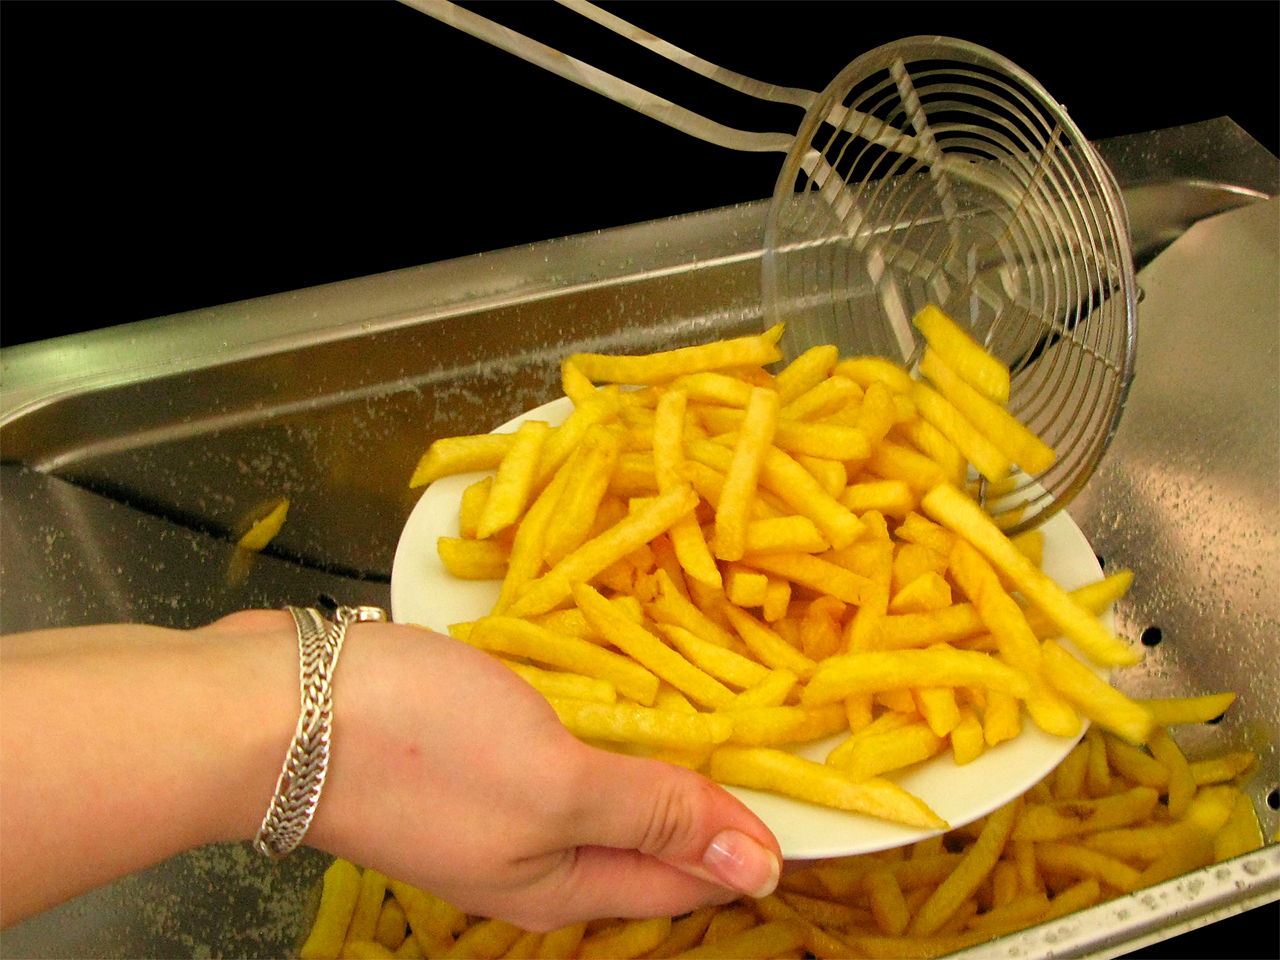 Why Are Fried Foods Bad for You?